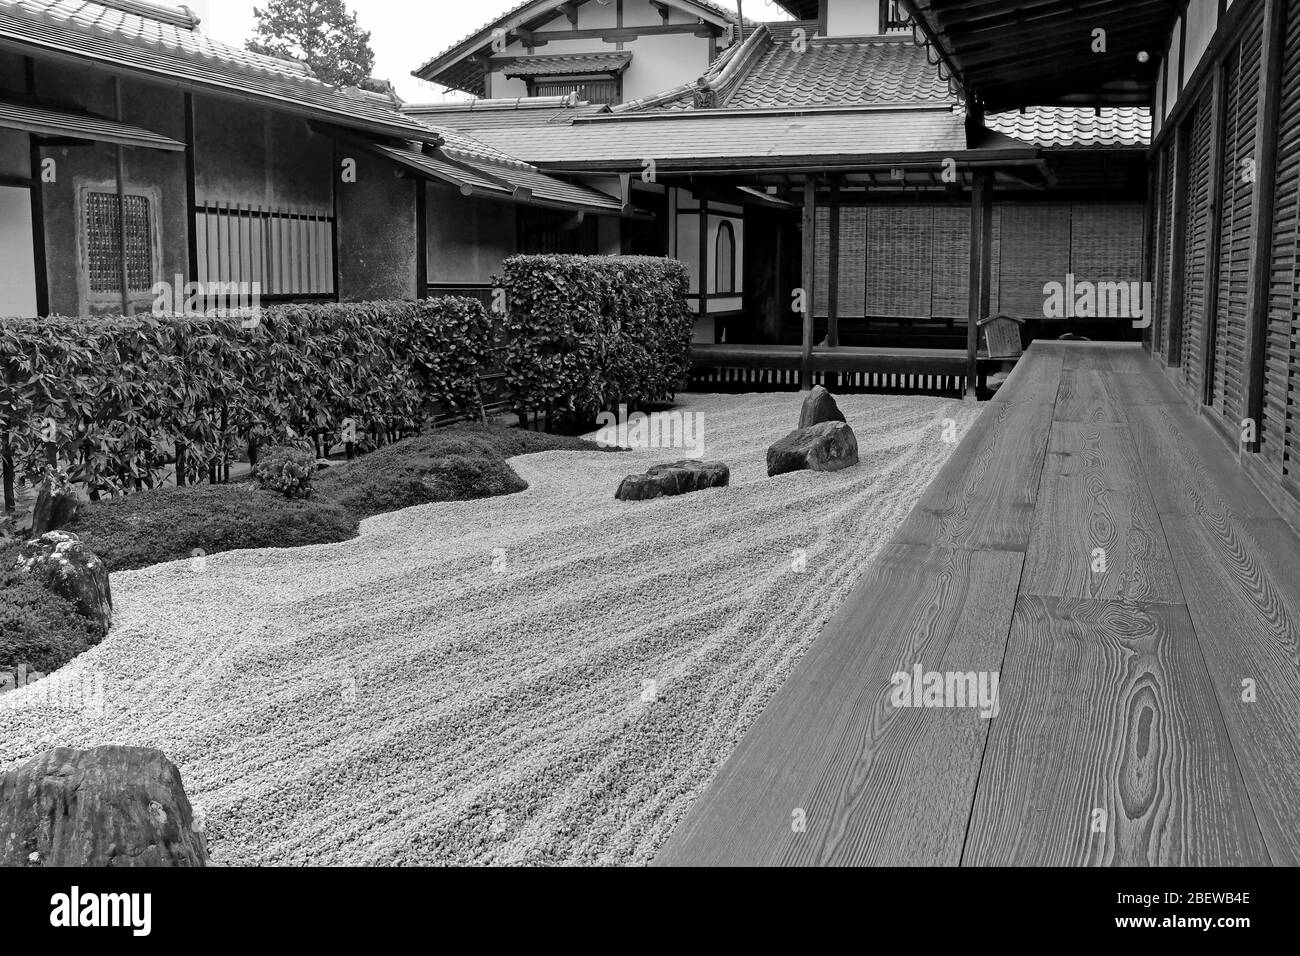 Zuiho-in sub-temple solitary sitting garden area within the Daitokuji Monastery complex in Kyoto, Japan. Stock Photo